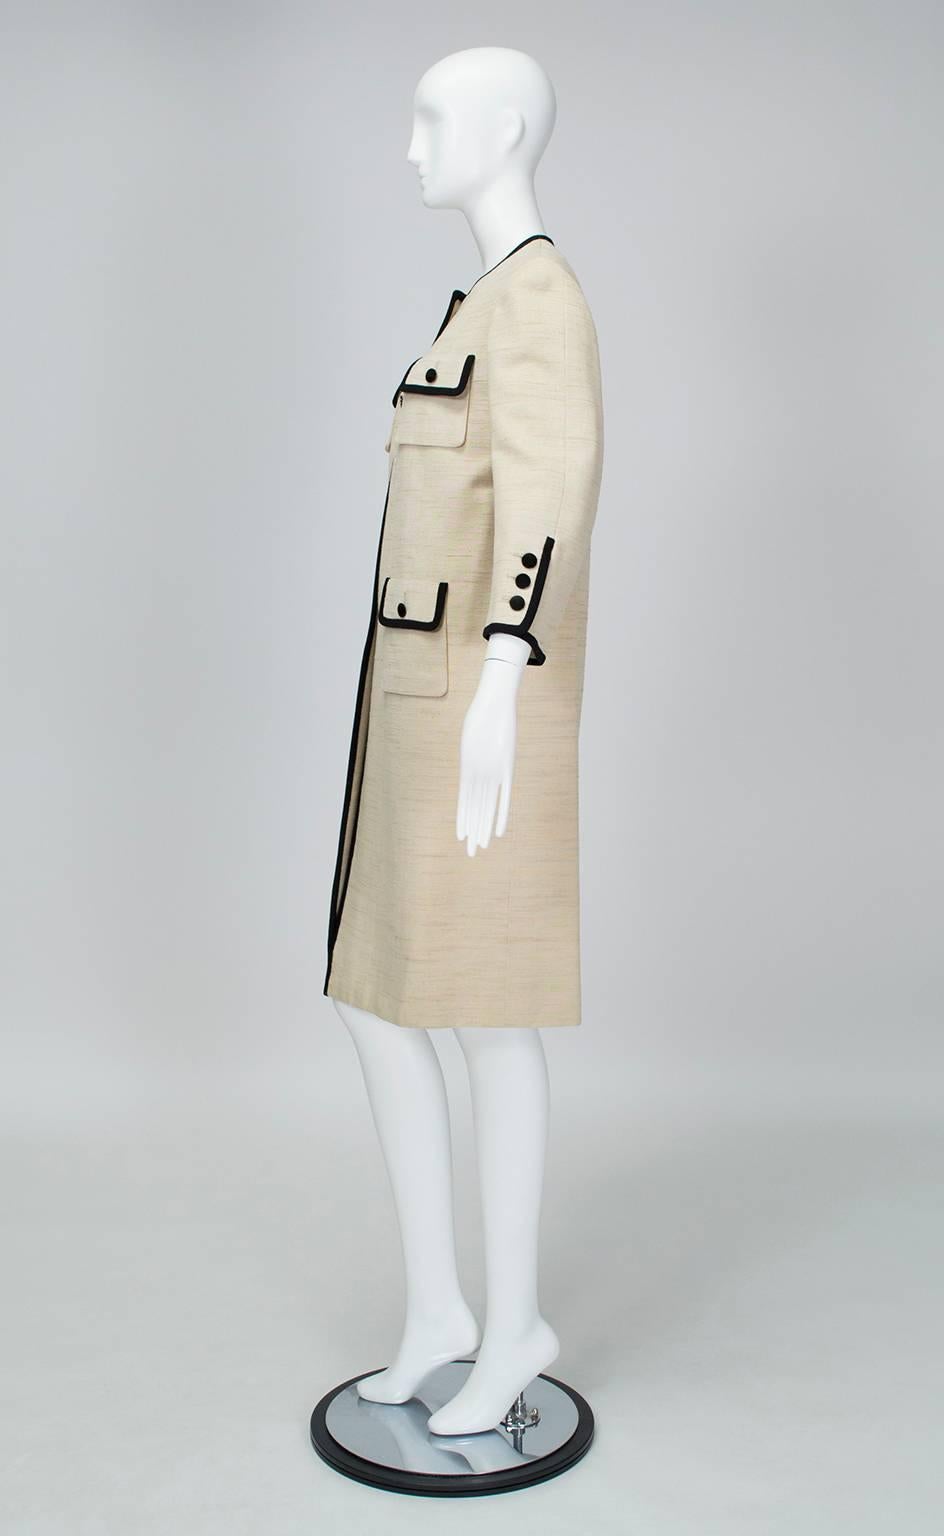 Famous for making ready-to-wear clothes with the same meticulousness that other designers reserved for couture, Norman Norell excelled when creating crisp, clean silhouettes that showcased his fastidious tailoring.  This contrast coat is the perfect